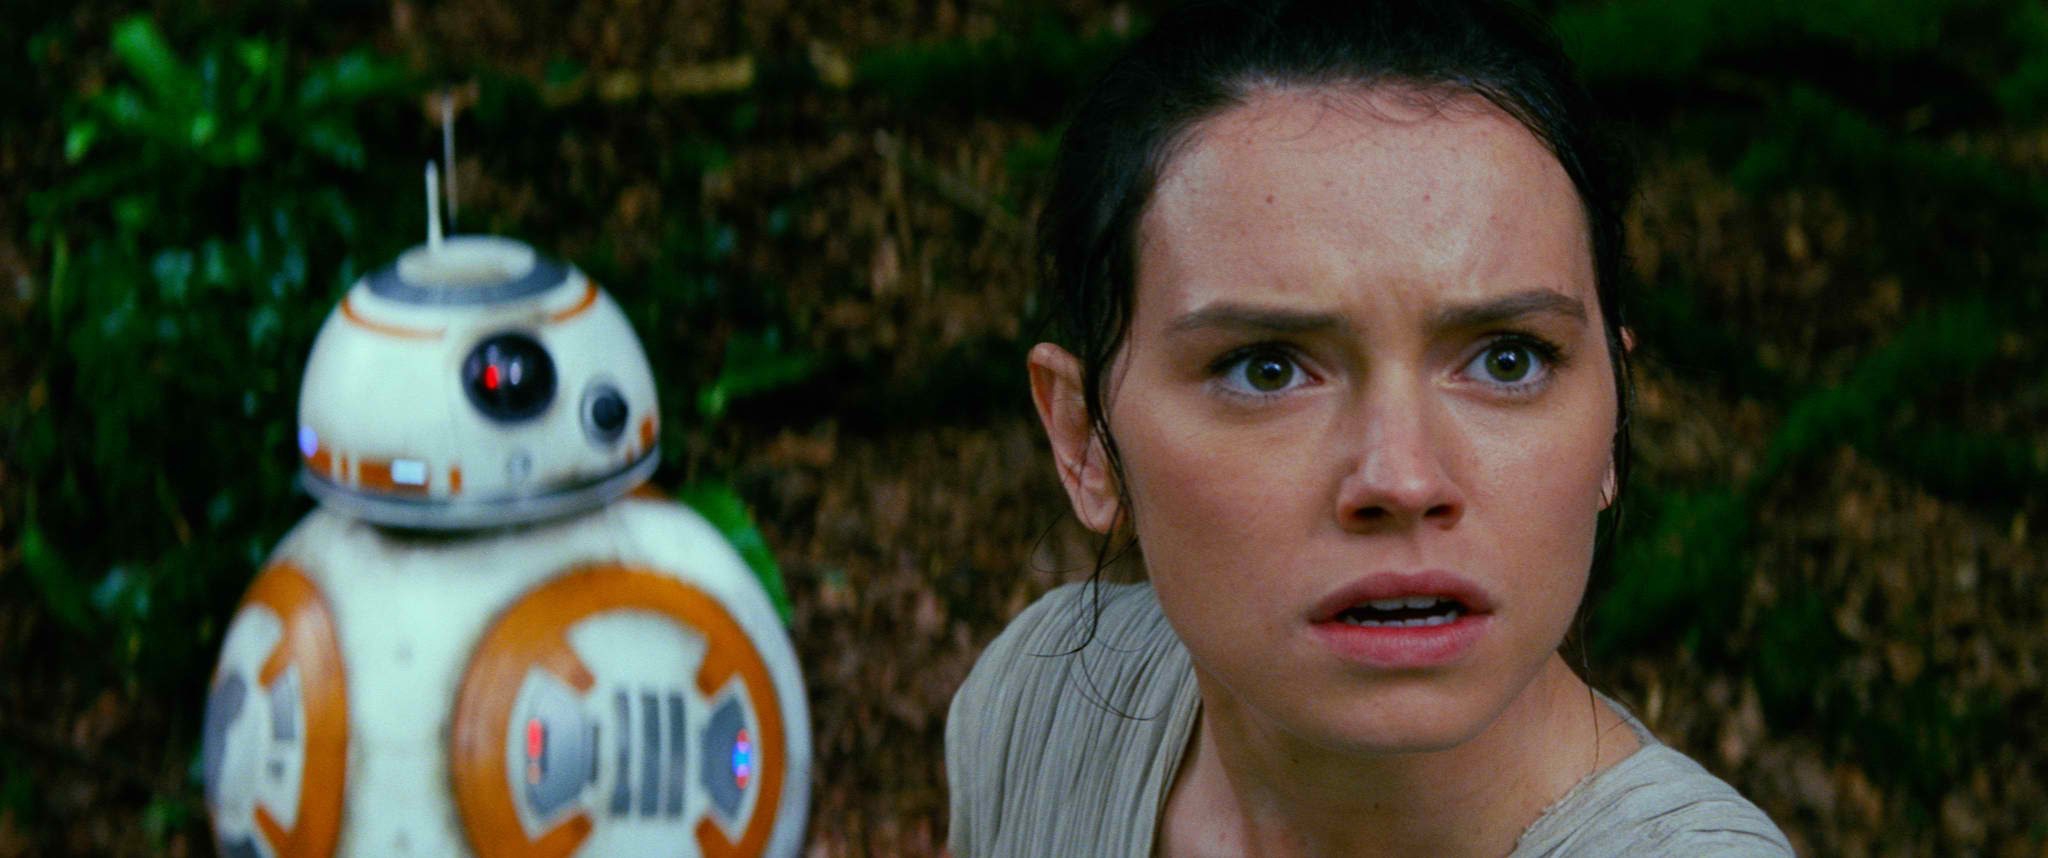 ‘Star Wars: The Force Awakens’ review: Something new, something old, something borrowed